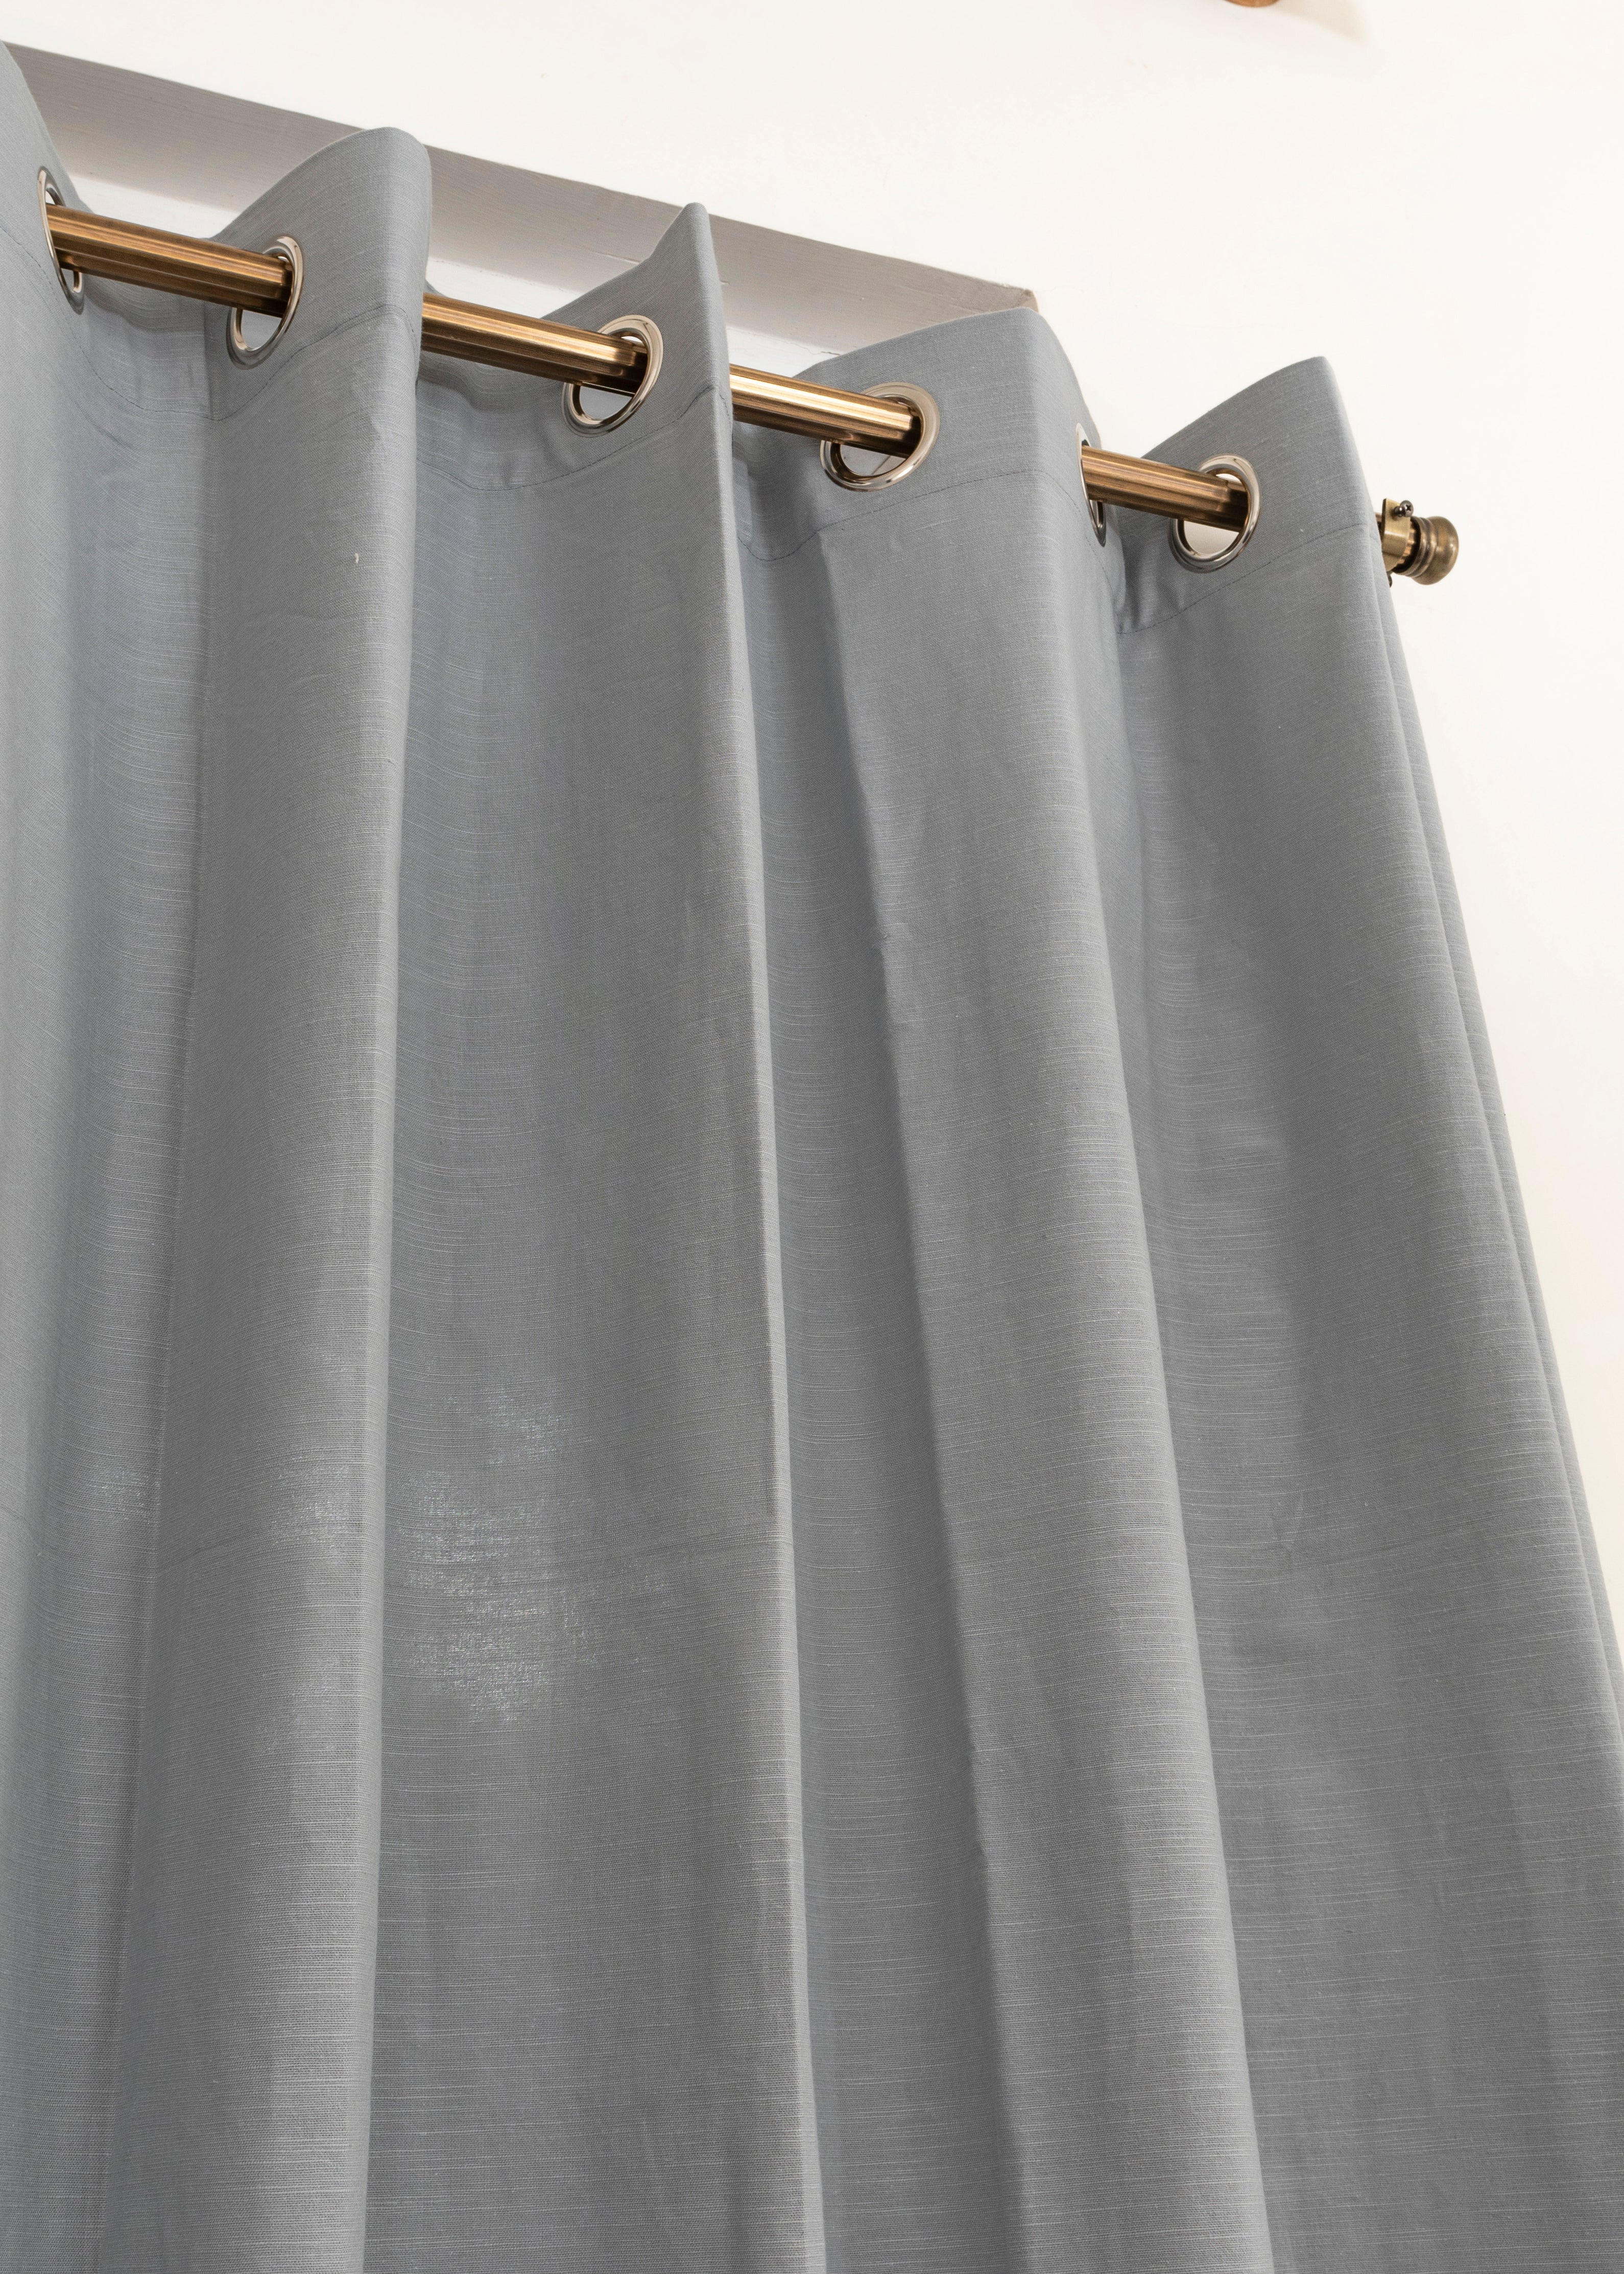 Solid Ultimate grey 100% cotton plain curtain for bedroom - Room darkening - Pack of 1